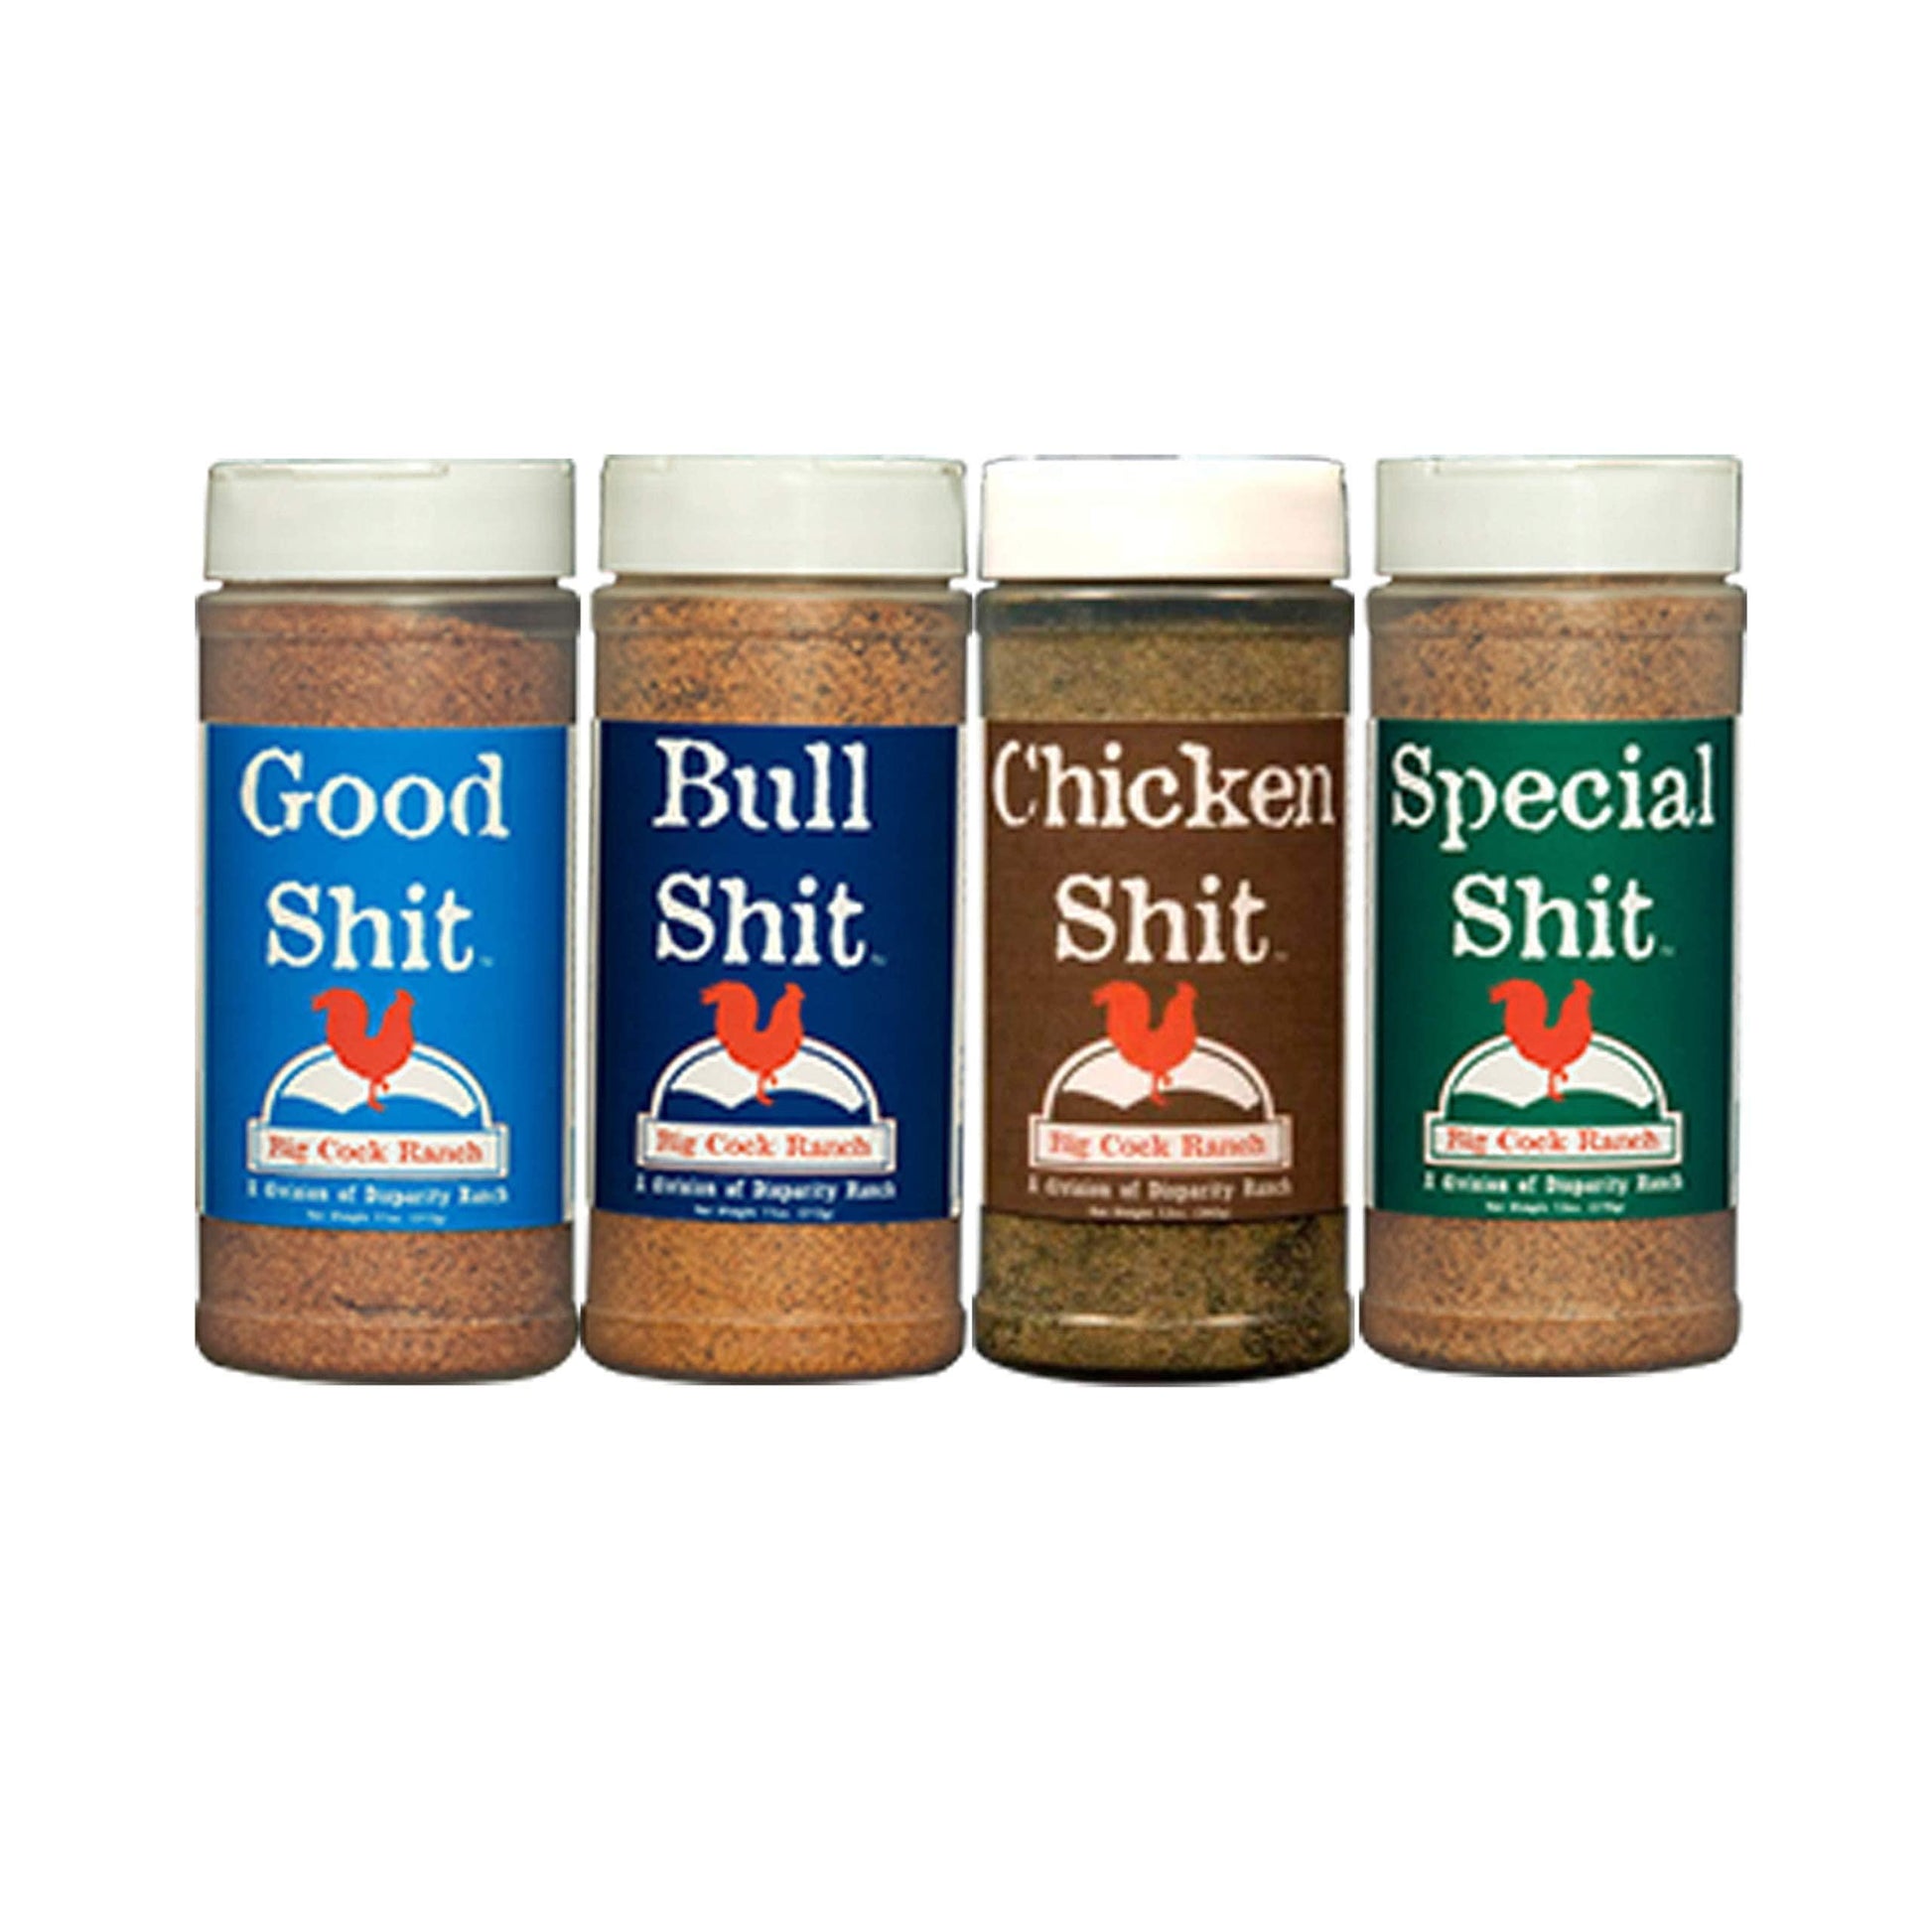 Big Cock Ranch Gourmet Seasoning Bundle All-Purpose Special 13oz, Bull for Steak, Good Sweet N' Salty 11oz and Chicken Gluten-Free and No MSG - CookCave